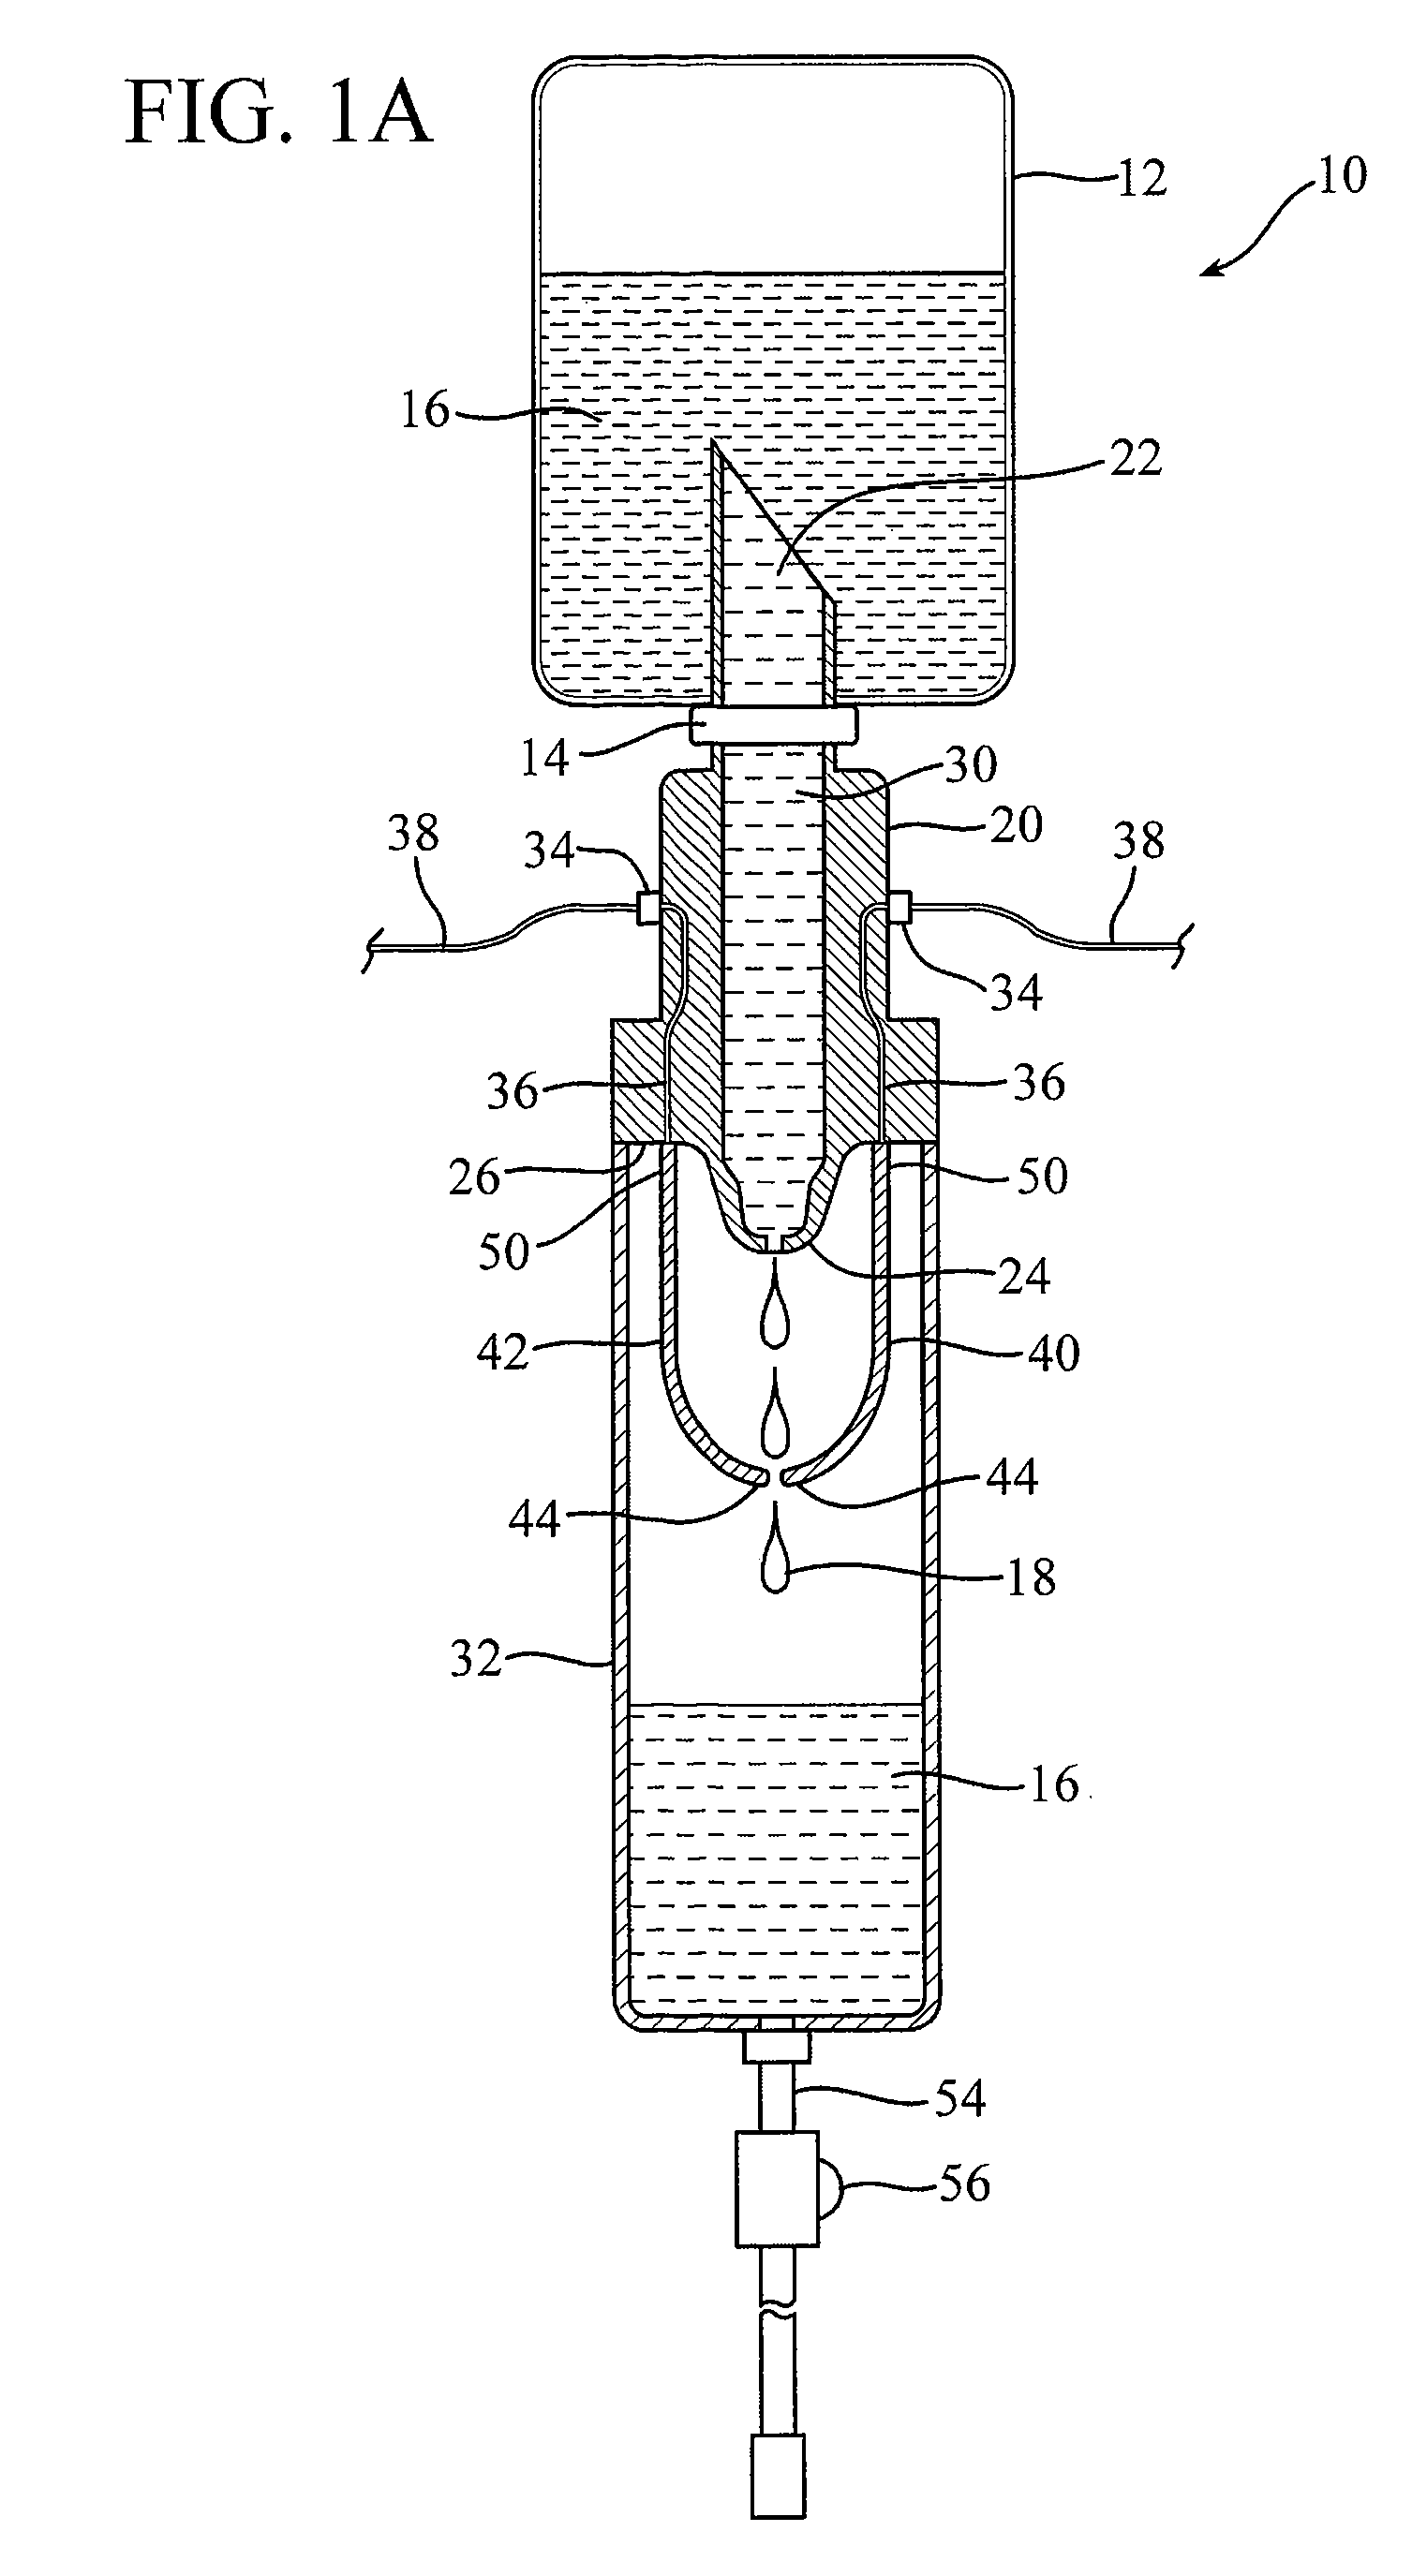 Systems and methods for providing an IV administration set incorporating drip monitoring circuitry